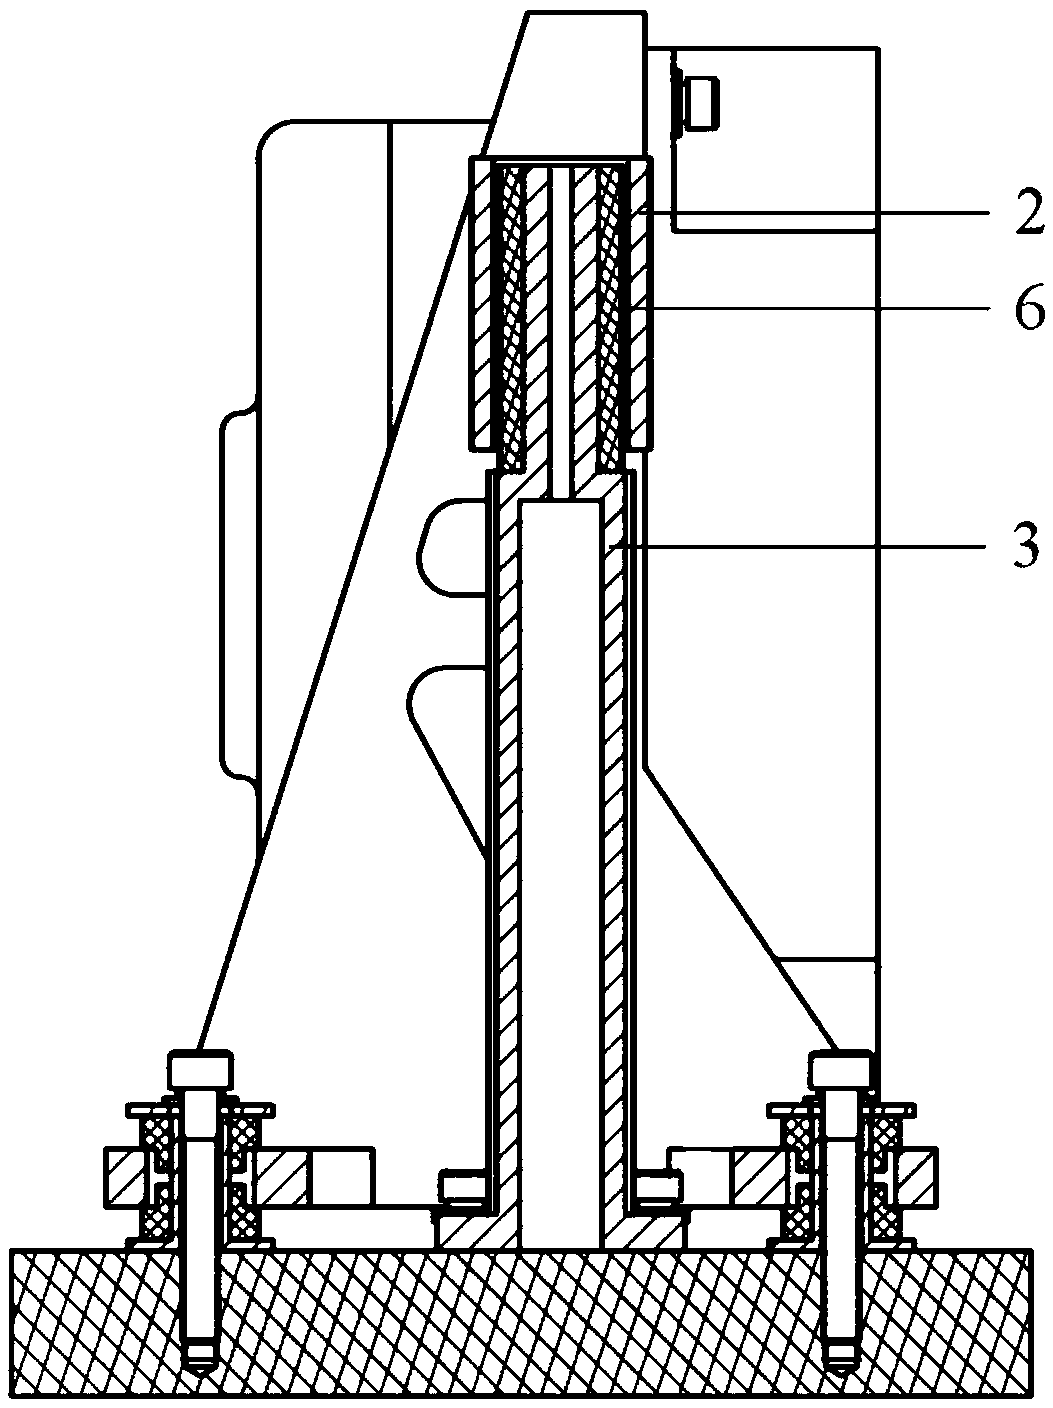 Anti-sway vibration isolating device for reducing micro-vibration of flywheel